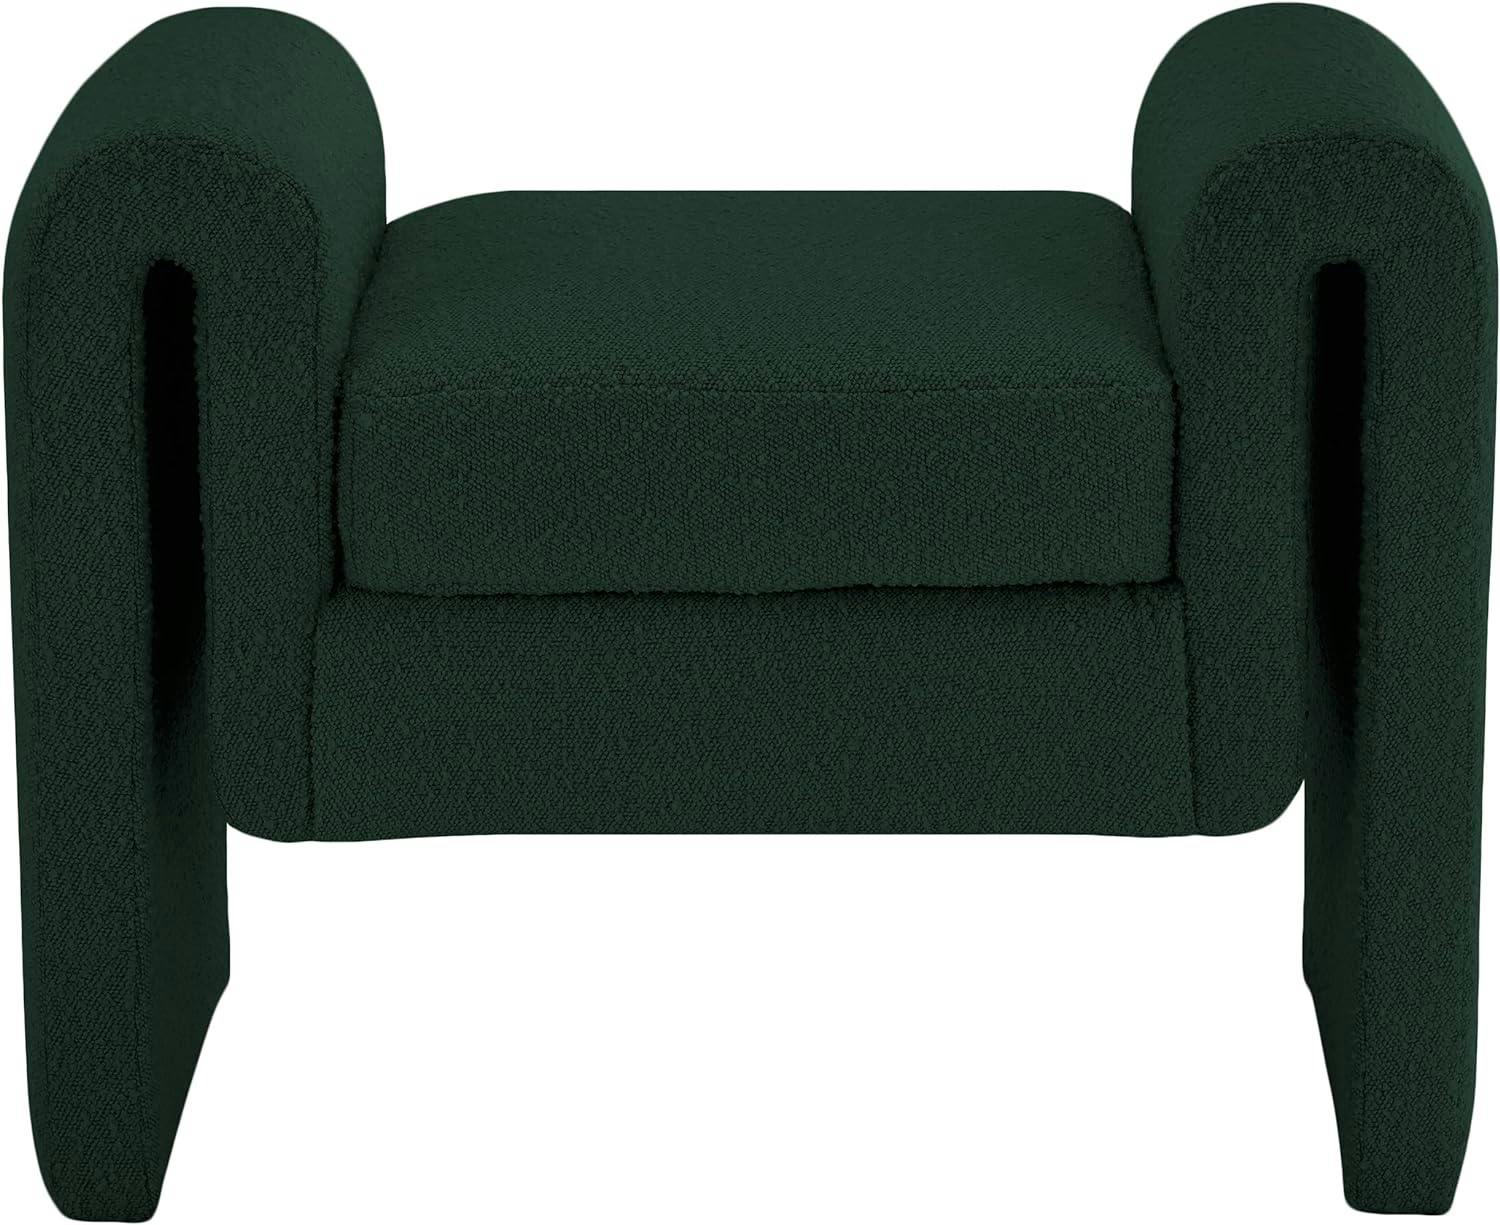 Contemporary Green Boucle Upholstered Bench with Curved Arms